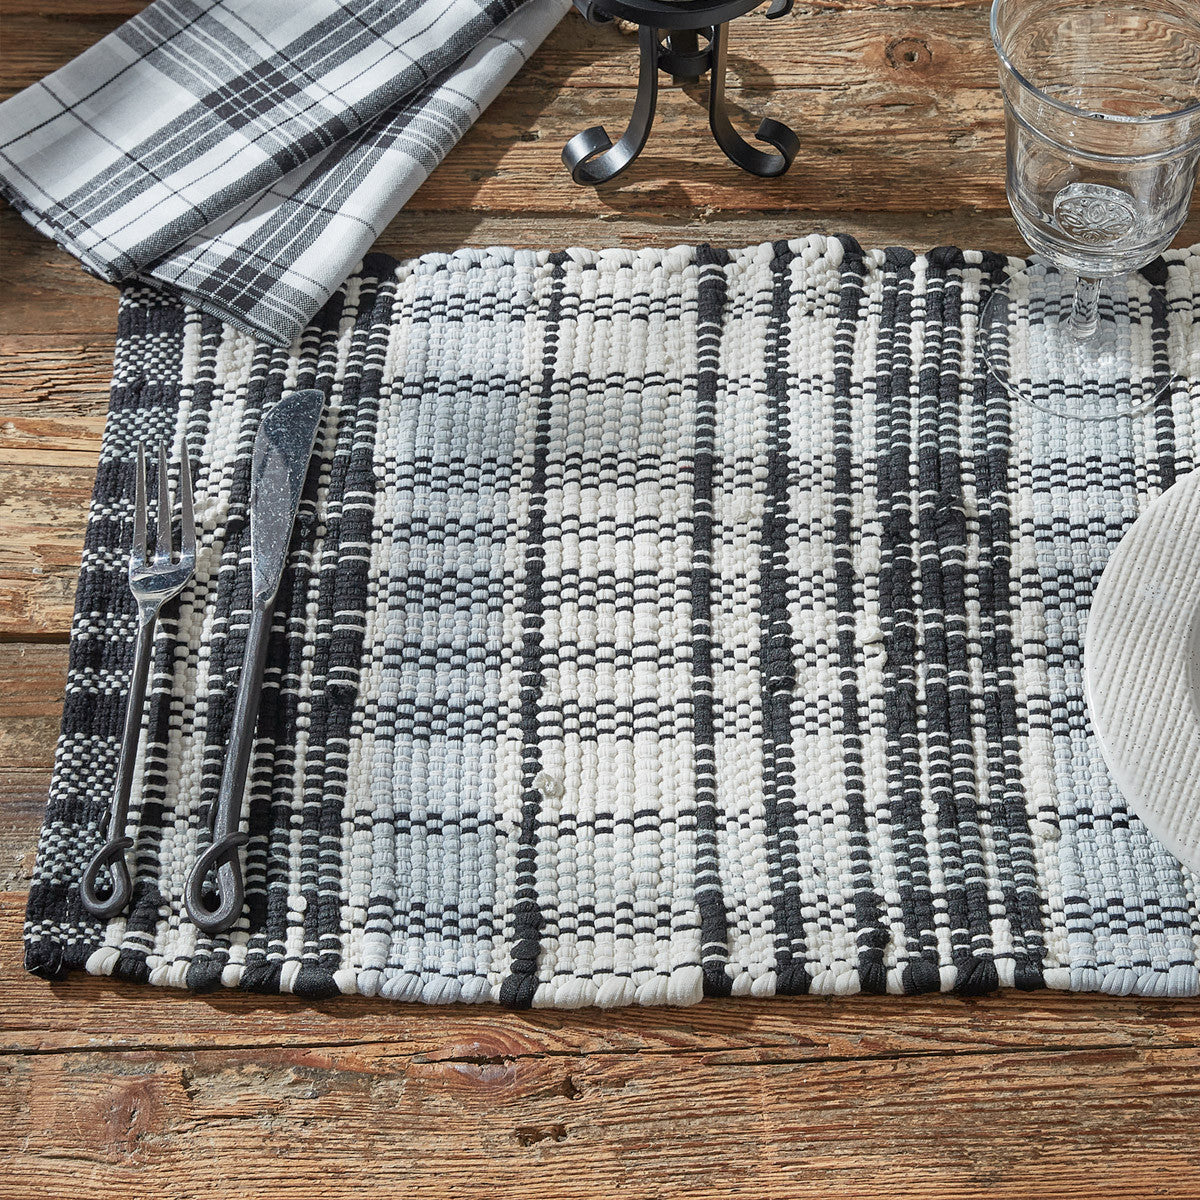 Refined Rustic Chindi Table Runner 54"L - Park Designs